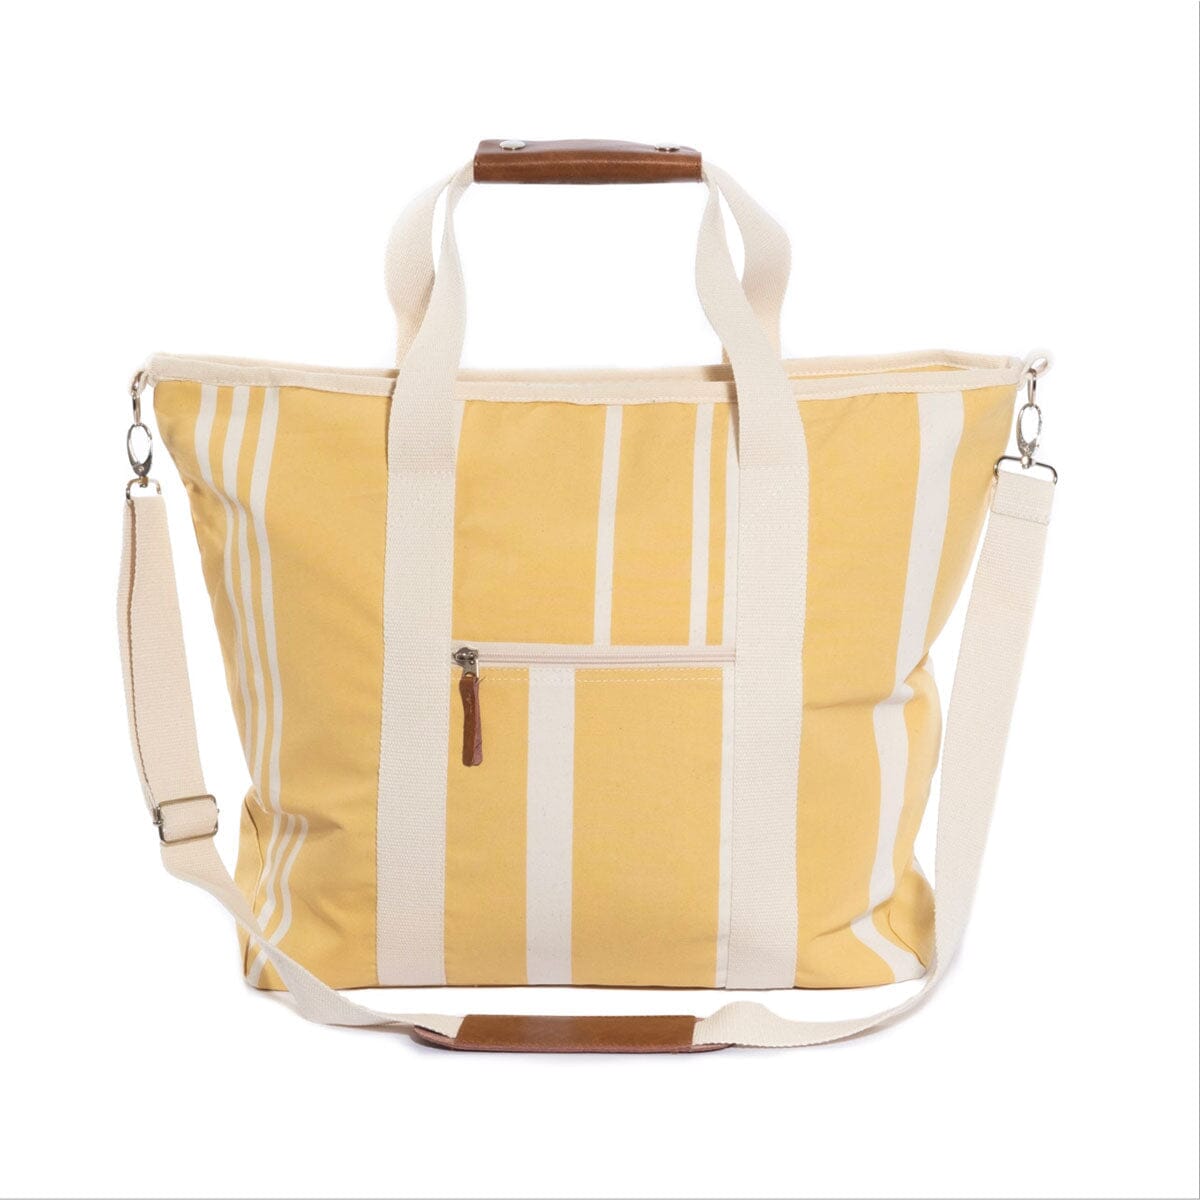 The Cooler Tote Bag - Vintage Yellow Stripe Cooler Tote Business & Pleasure Co 